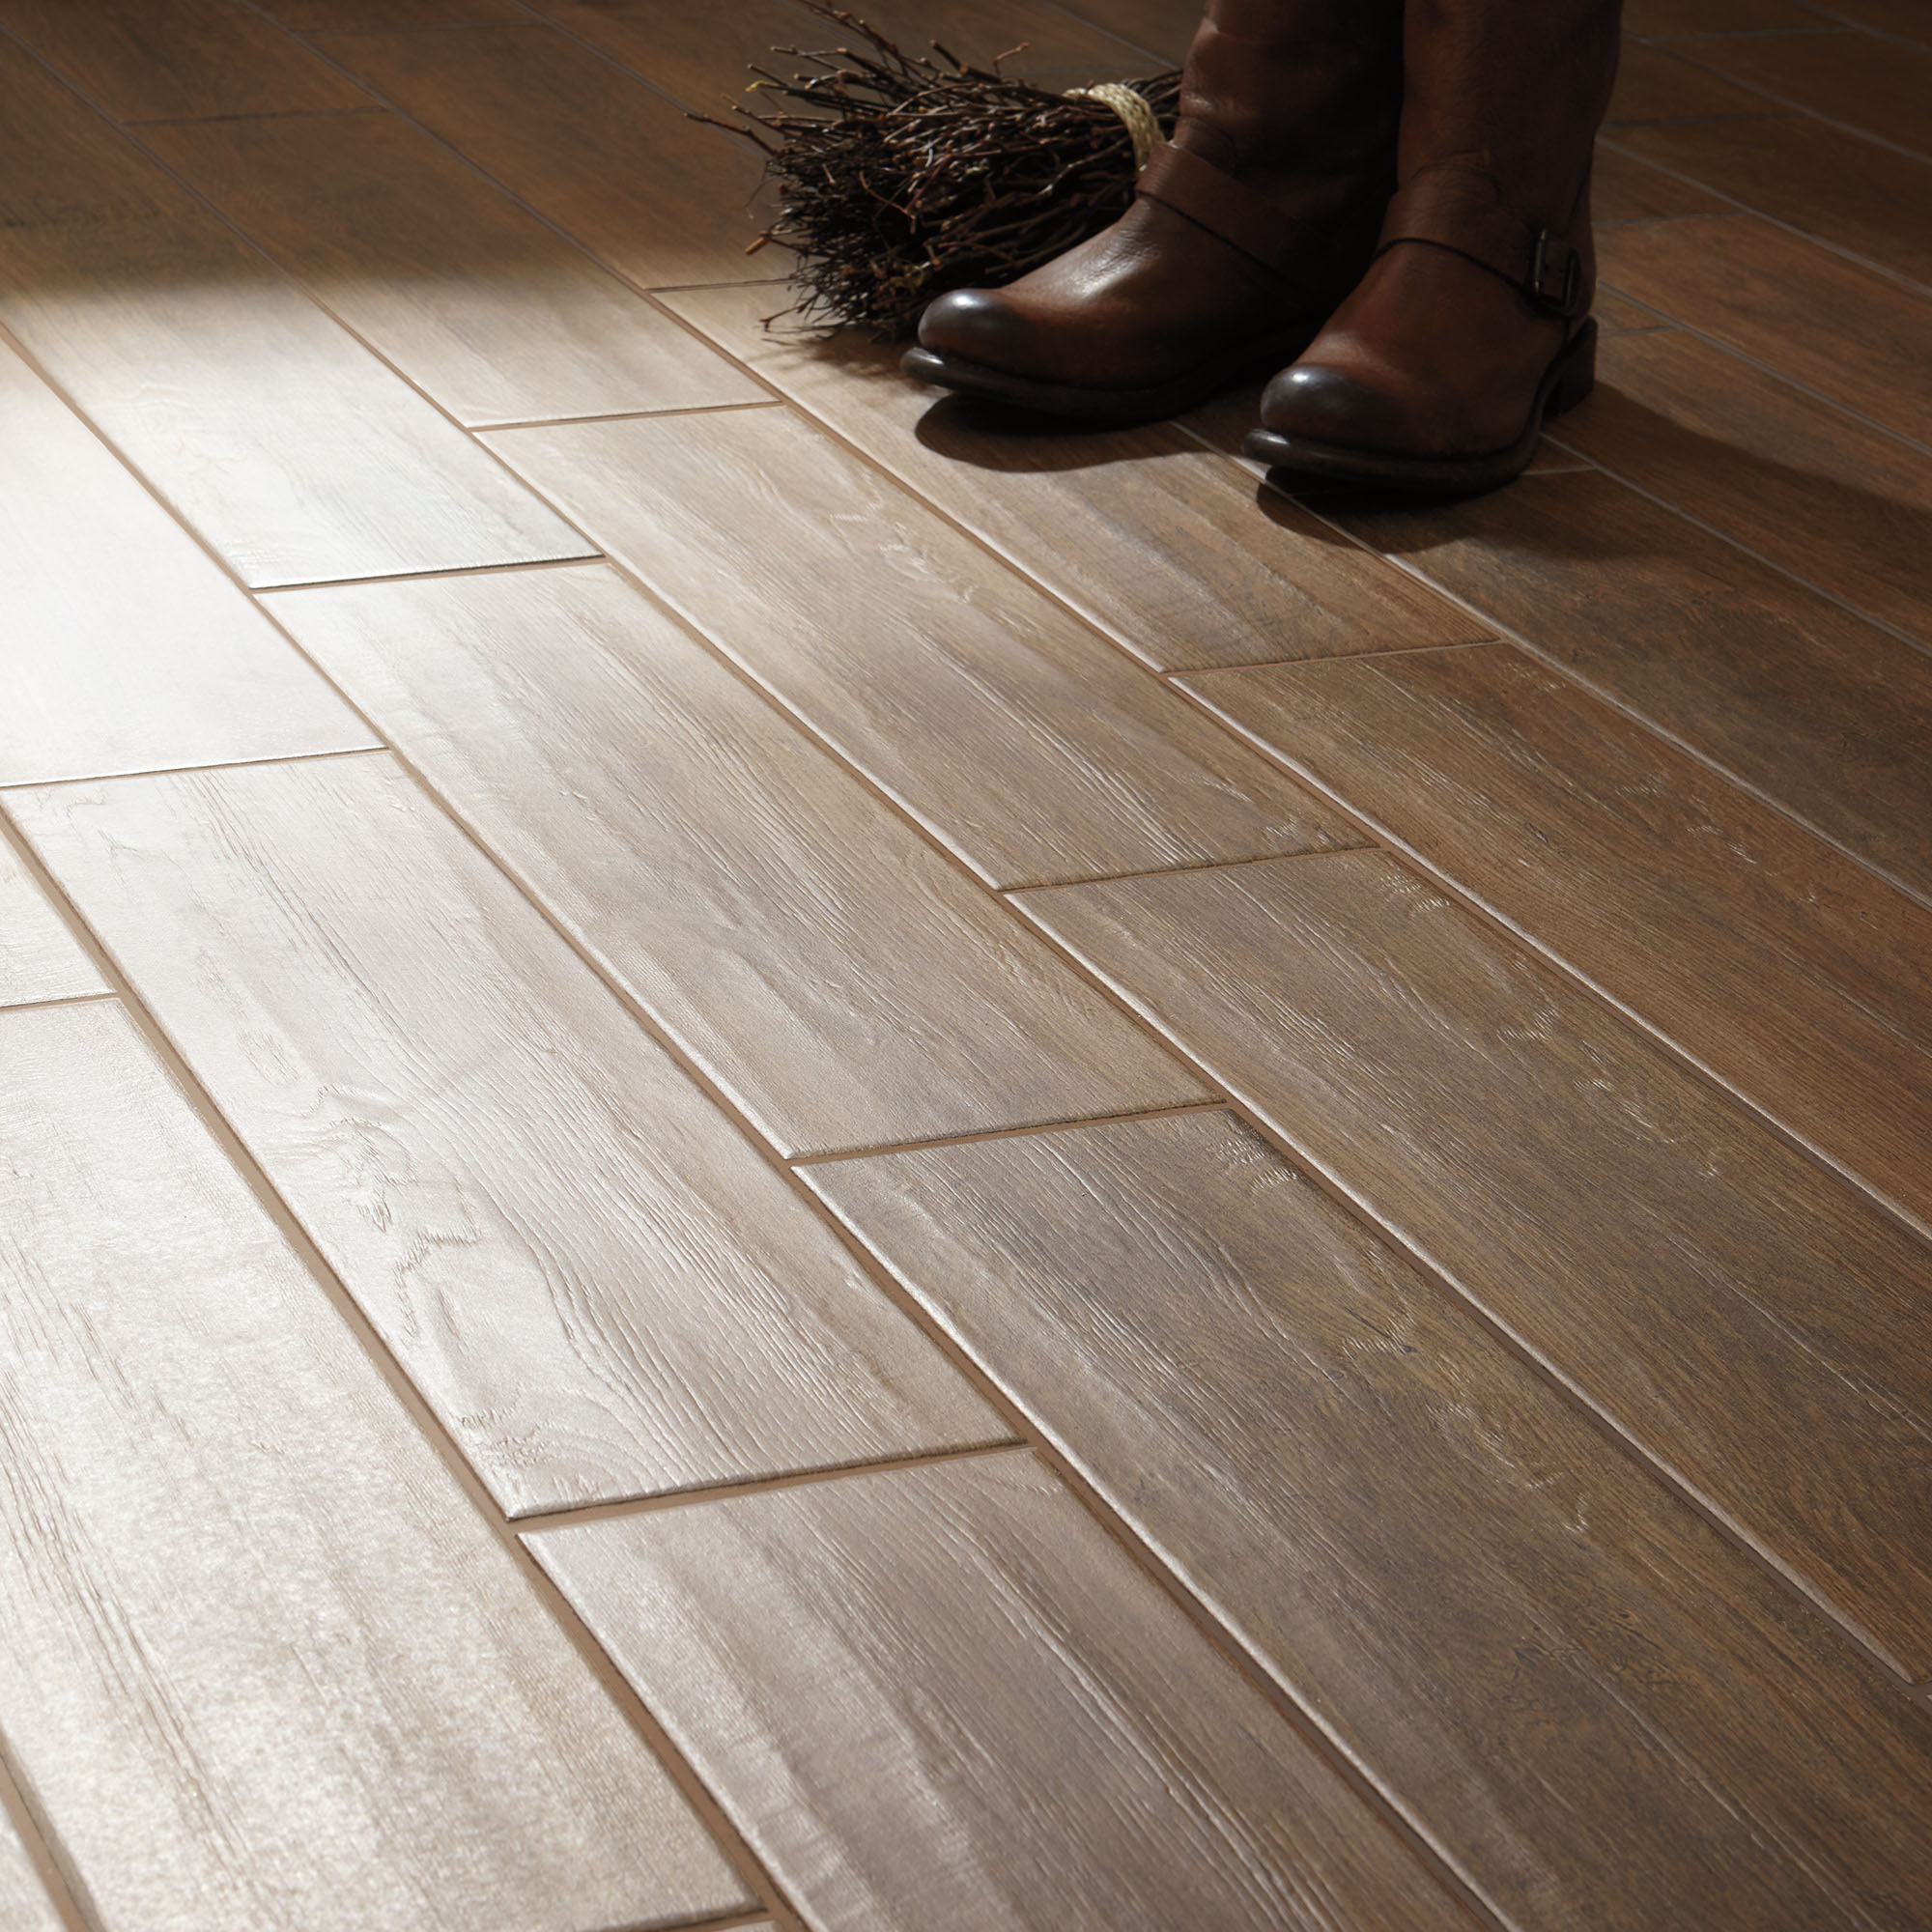 Willow Bend Field Tile Click 6x24 Matte in Willow Bend Smoky Brown Wb02 6 X 36 - Tile by Daltile